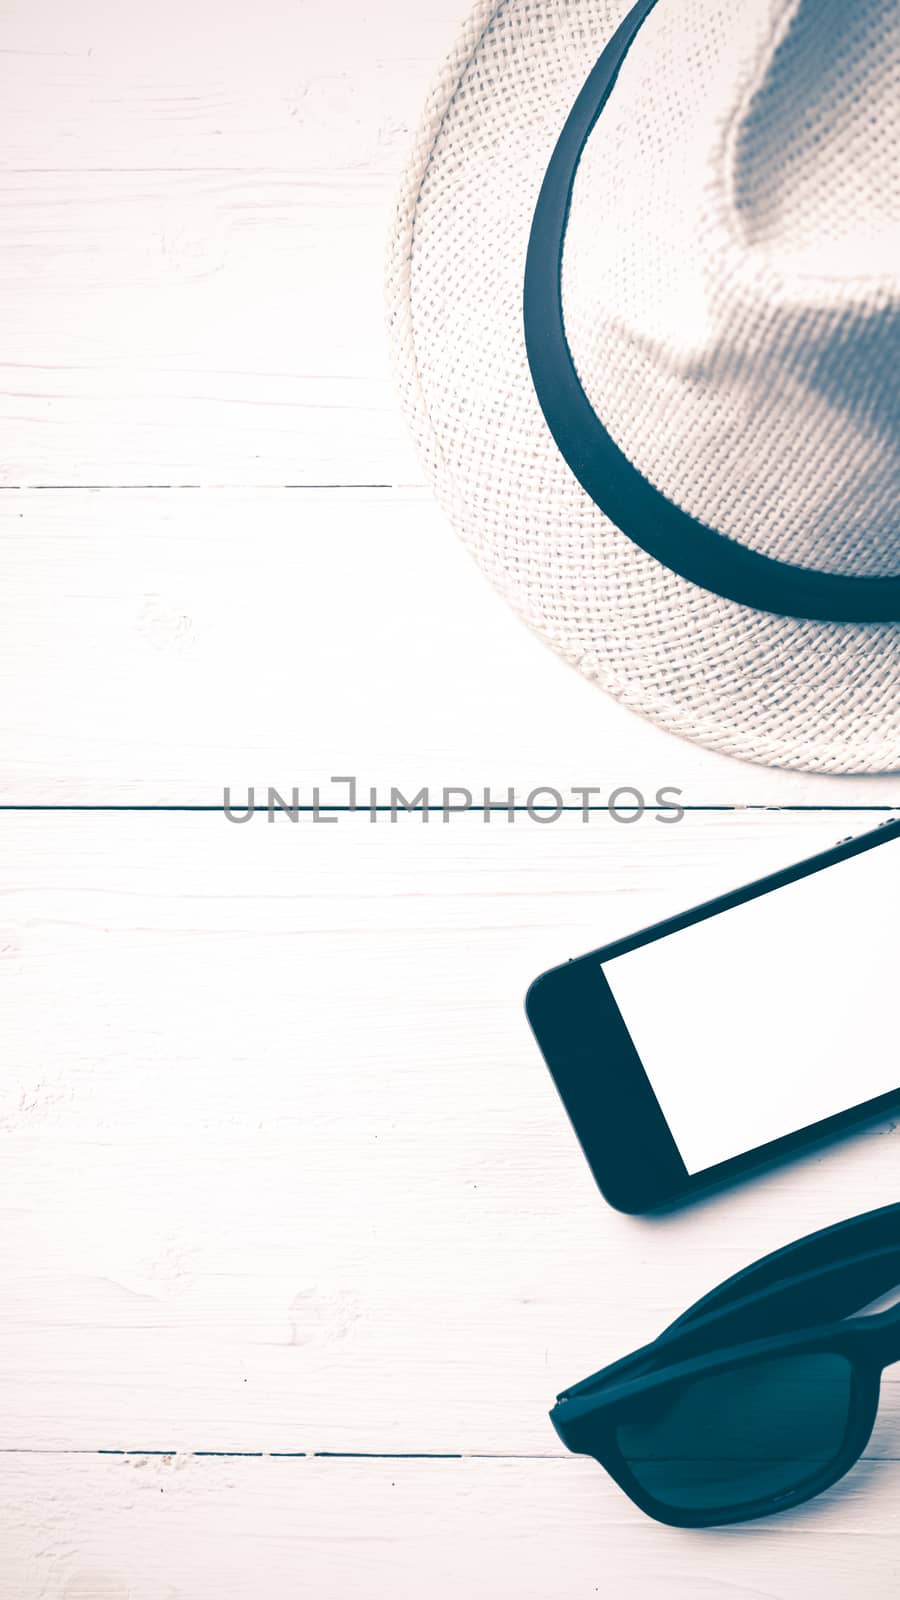 hat sunglasses and smart phone on white table vintage style